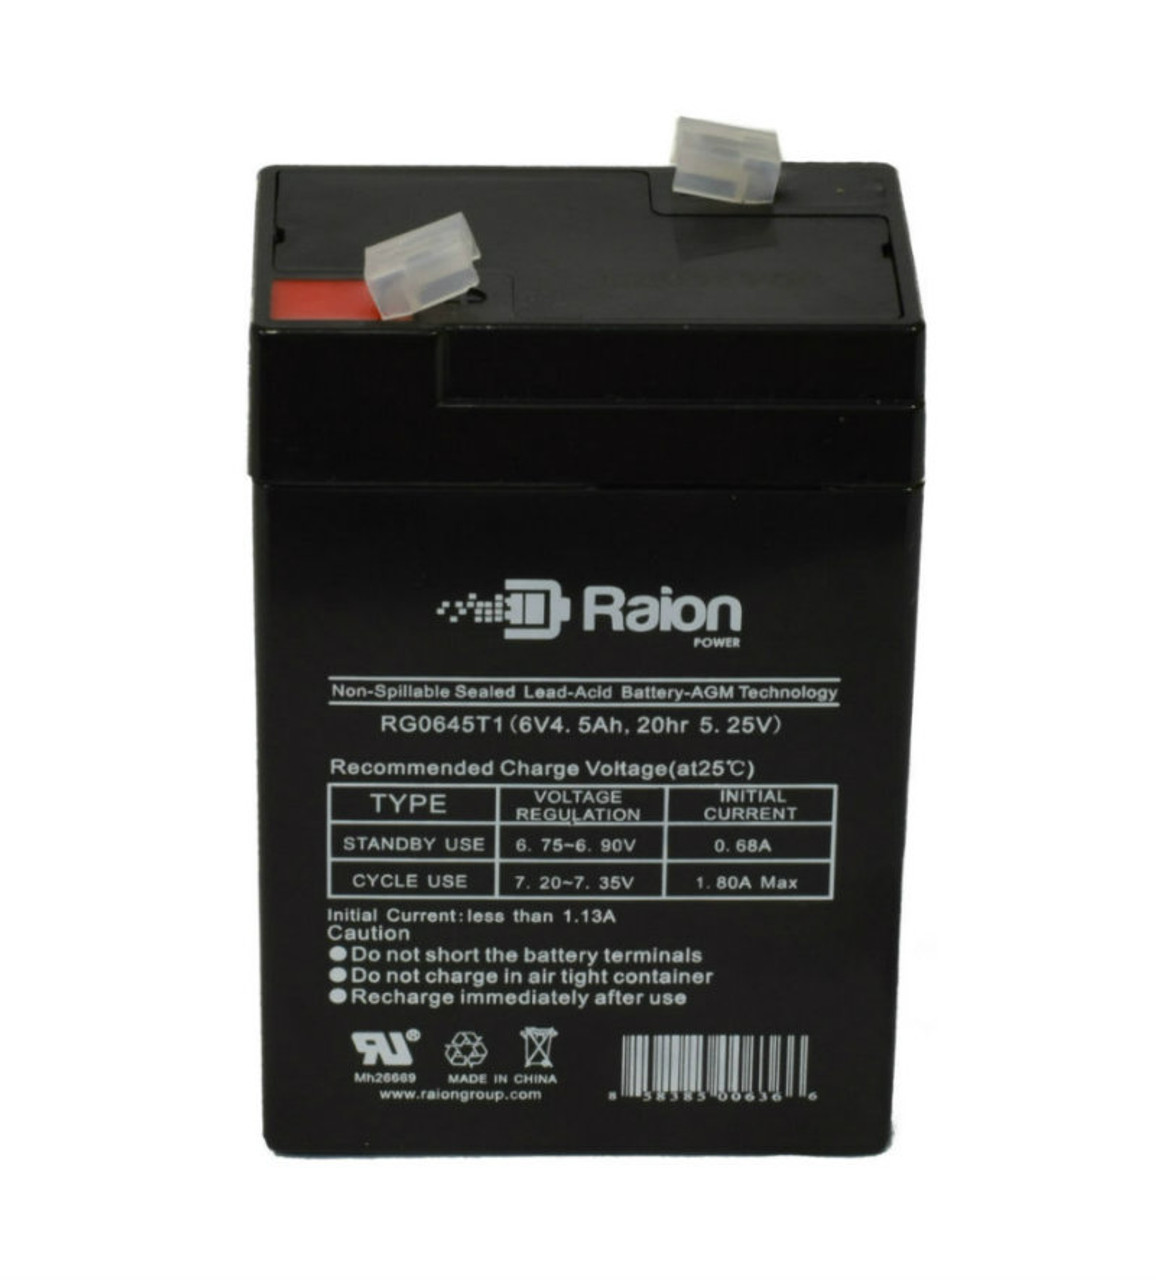 Raion Power RG0645T1 Replacement Battery Cartridge for Kweight Power KW 6-4.5